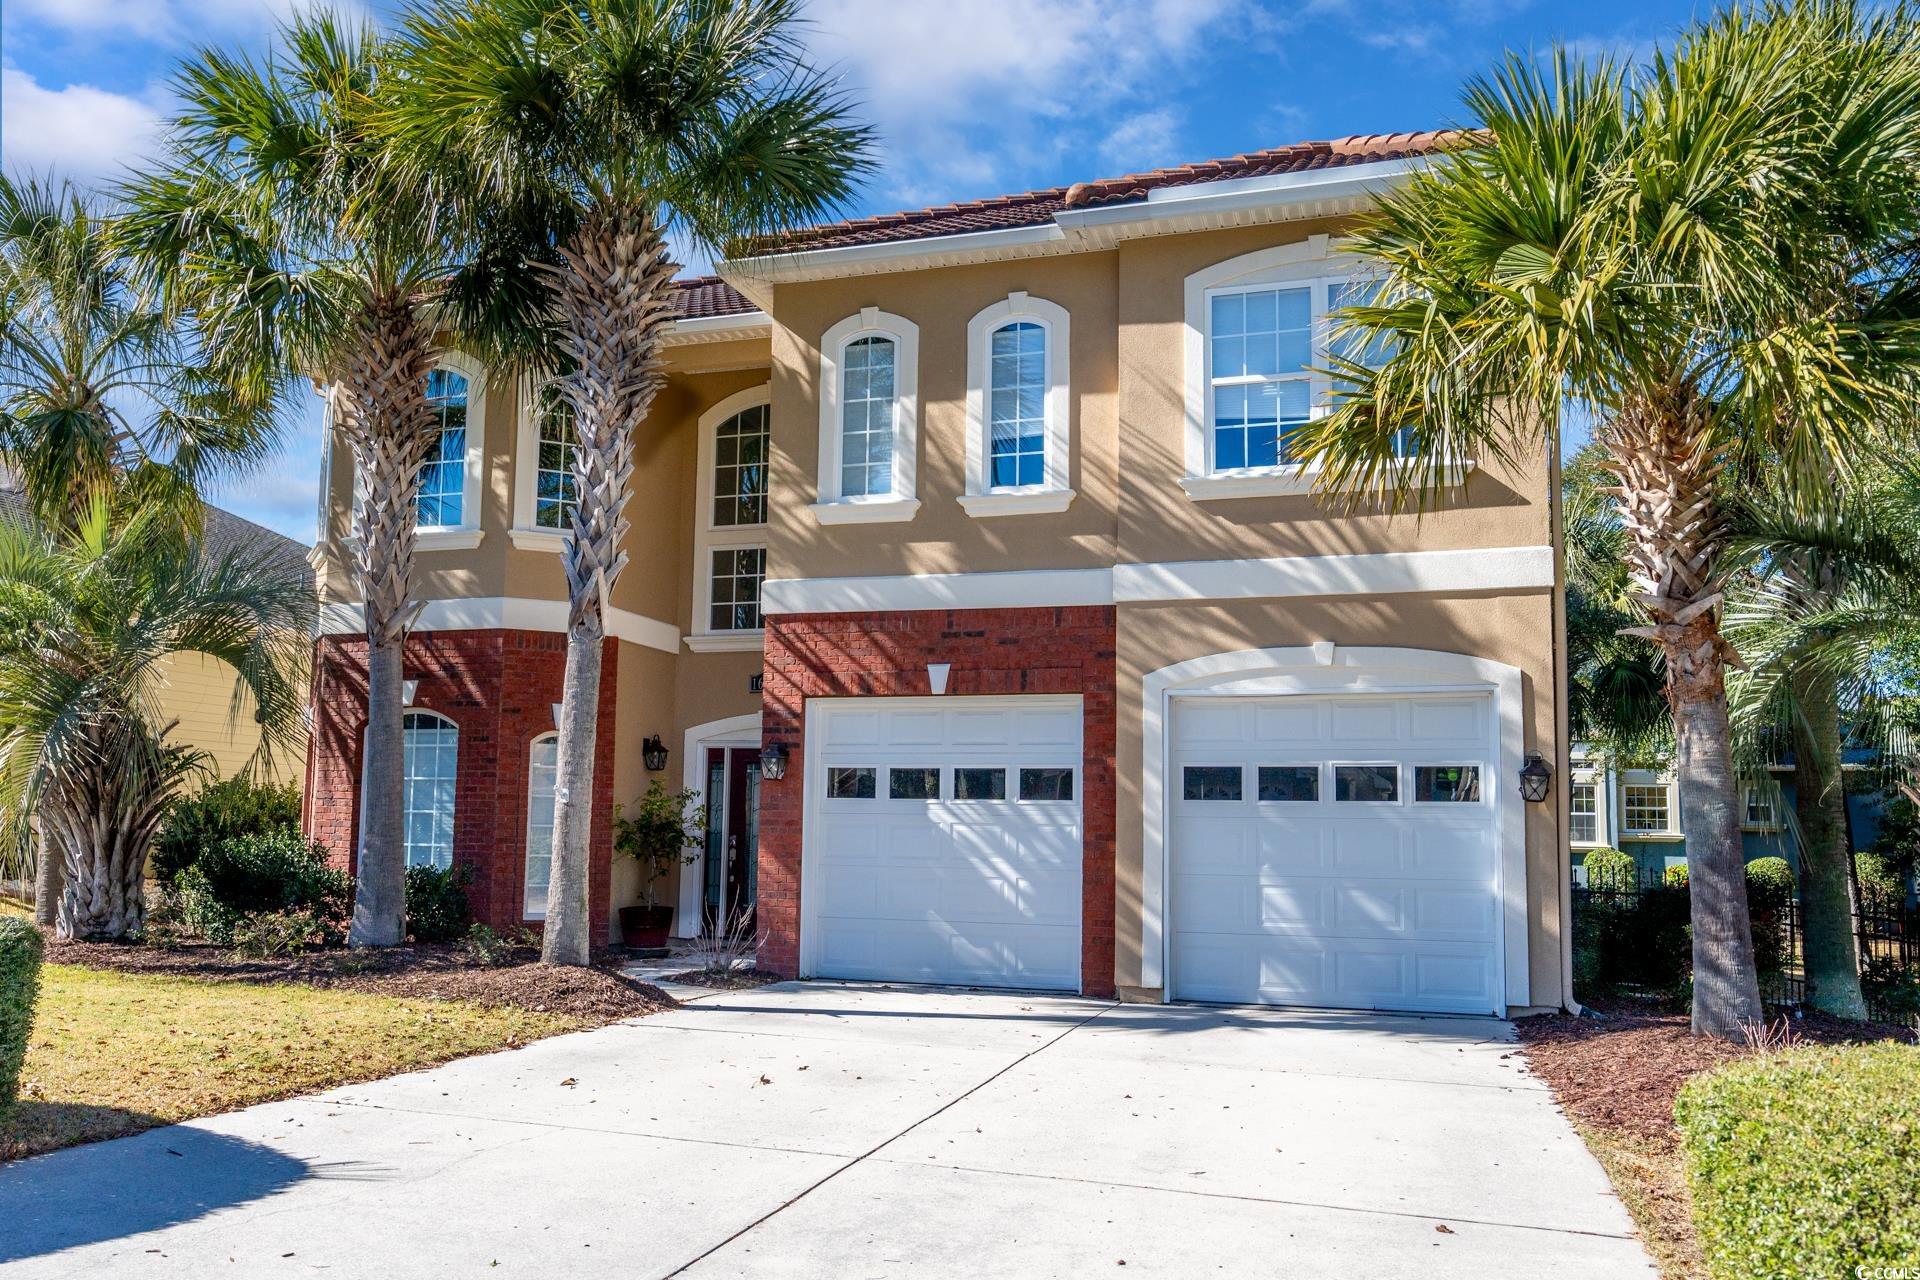 ***open house fri may 3rd 3-6 & sun may 5th 1-3:30 pm*** step into your dream home in the coveted sunset harbour. this beautiful 4 bedroom, 3 full & 2 half bath home is located in one of the best waterway community in north myrtle beach ! this mediterranean-inspired gem offers a spacious great room with soaring ceilings, wood floors, and a gas fireplace—perfect for cozy gatherings. the recently updated kitchen is a chef's delight, boasting custom cabinets, granite countertops, and a gas cooktop. with four bedrooms, including two master suites, this home promises comfort and luxury. both masters feature tile walk-in showers, tubs, double sinks, walk-in closets, and stylish tray ceilings.upstairs, discover two additional bedrooms and a massive bonus room with beautiful wood floors, providing endless possibilities for your lifestyle. enjoy modern living with new windows, doors, and hvac systems, along with a brand-new security system. outside, a landscaped lot with fencing and accent lighting creates a perfect oasis. take advantage of community amenities, including a clubhouse, swimming pool, hot tub, piers, gazebo, boat launch, and boat/camper storage. conveniently located near shopping, dining, hospitals and a short drive to the beach, this home offers the ultimate lifestyle. explore the beauty of sunset harbour—schedule your visit today and make this exquisite property yours. all measurements are approximate; buyer to verify. live the coastal dream!